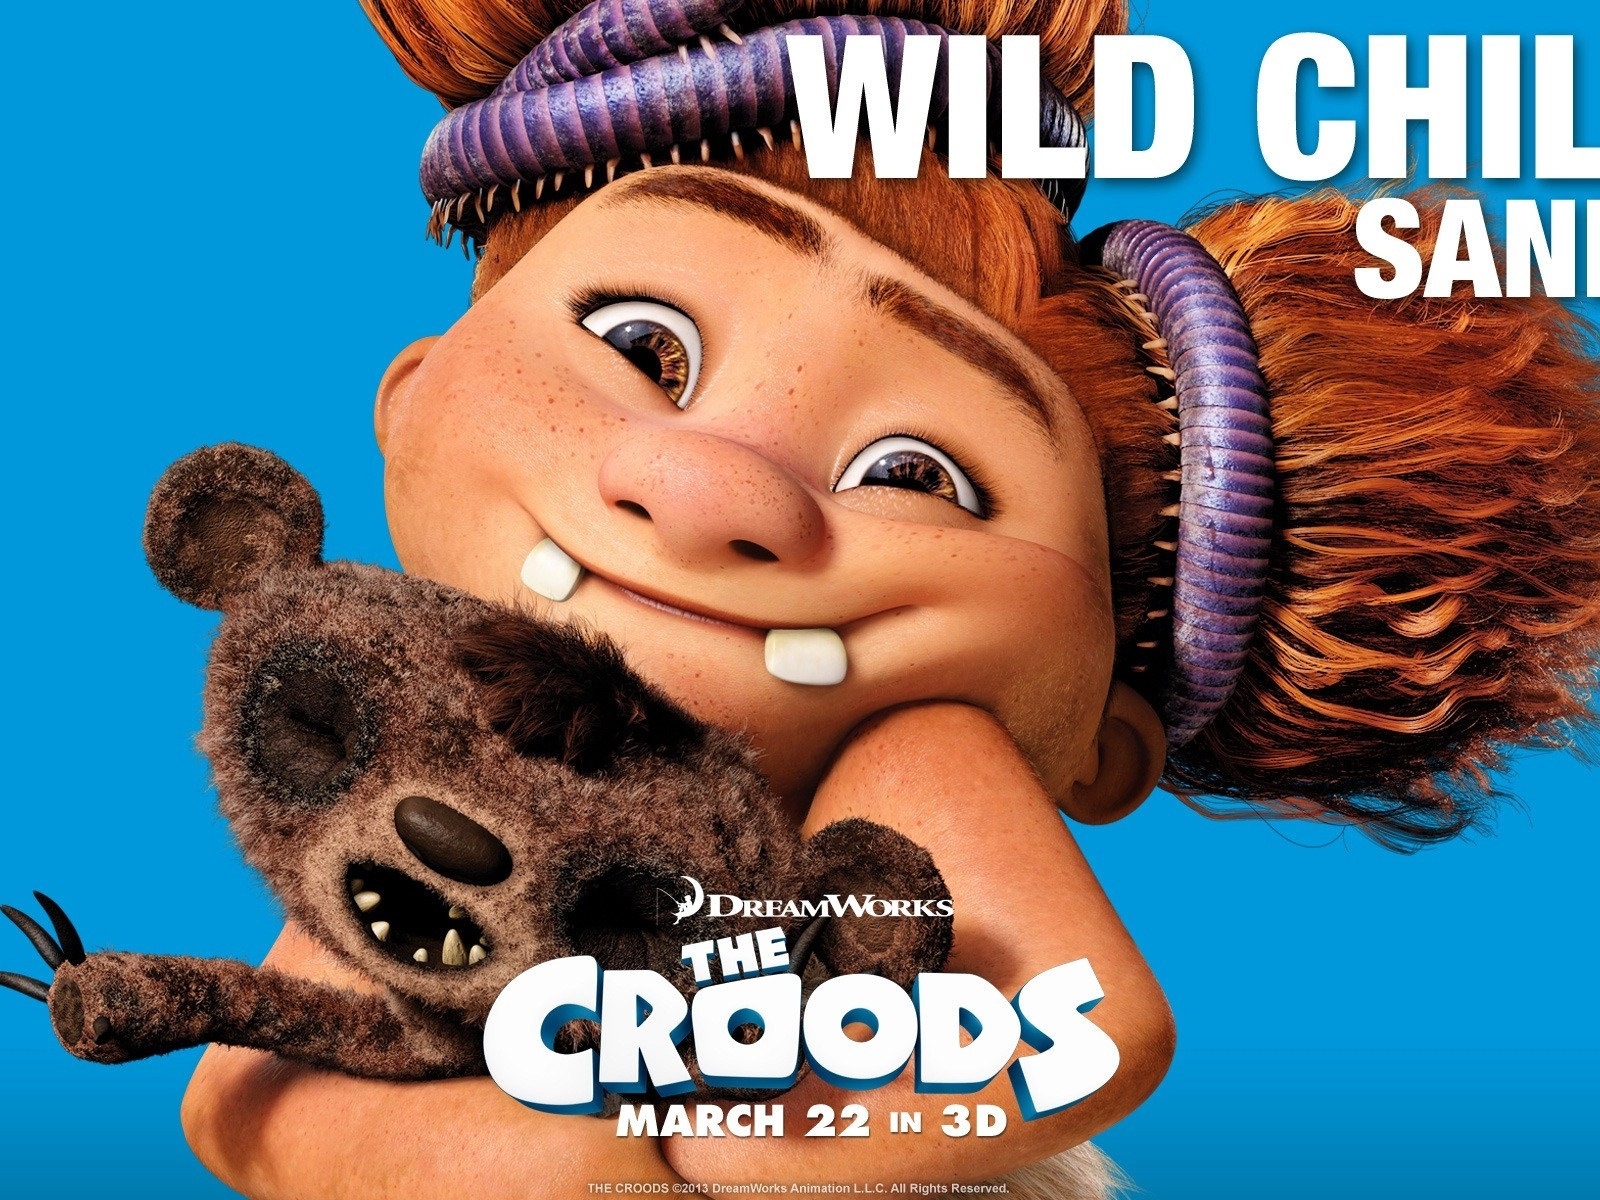 The Croods HD movie wallpapers #9 - 1600x1200